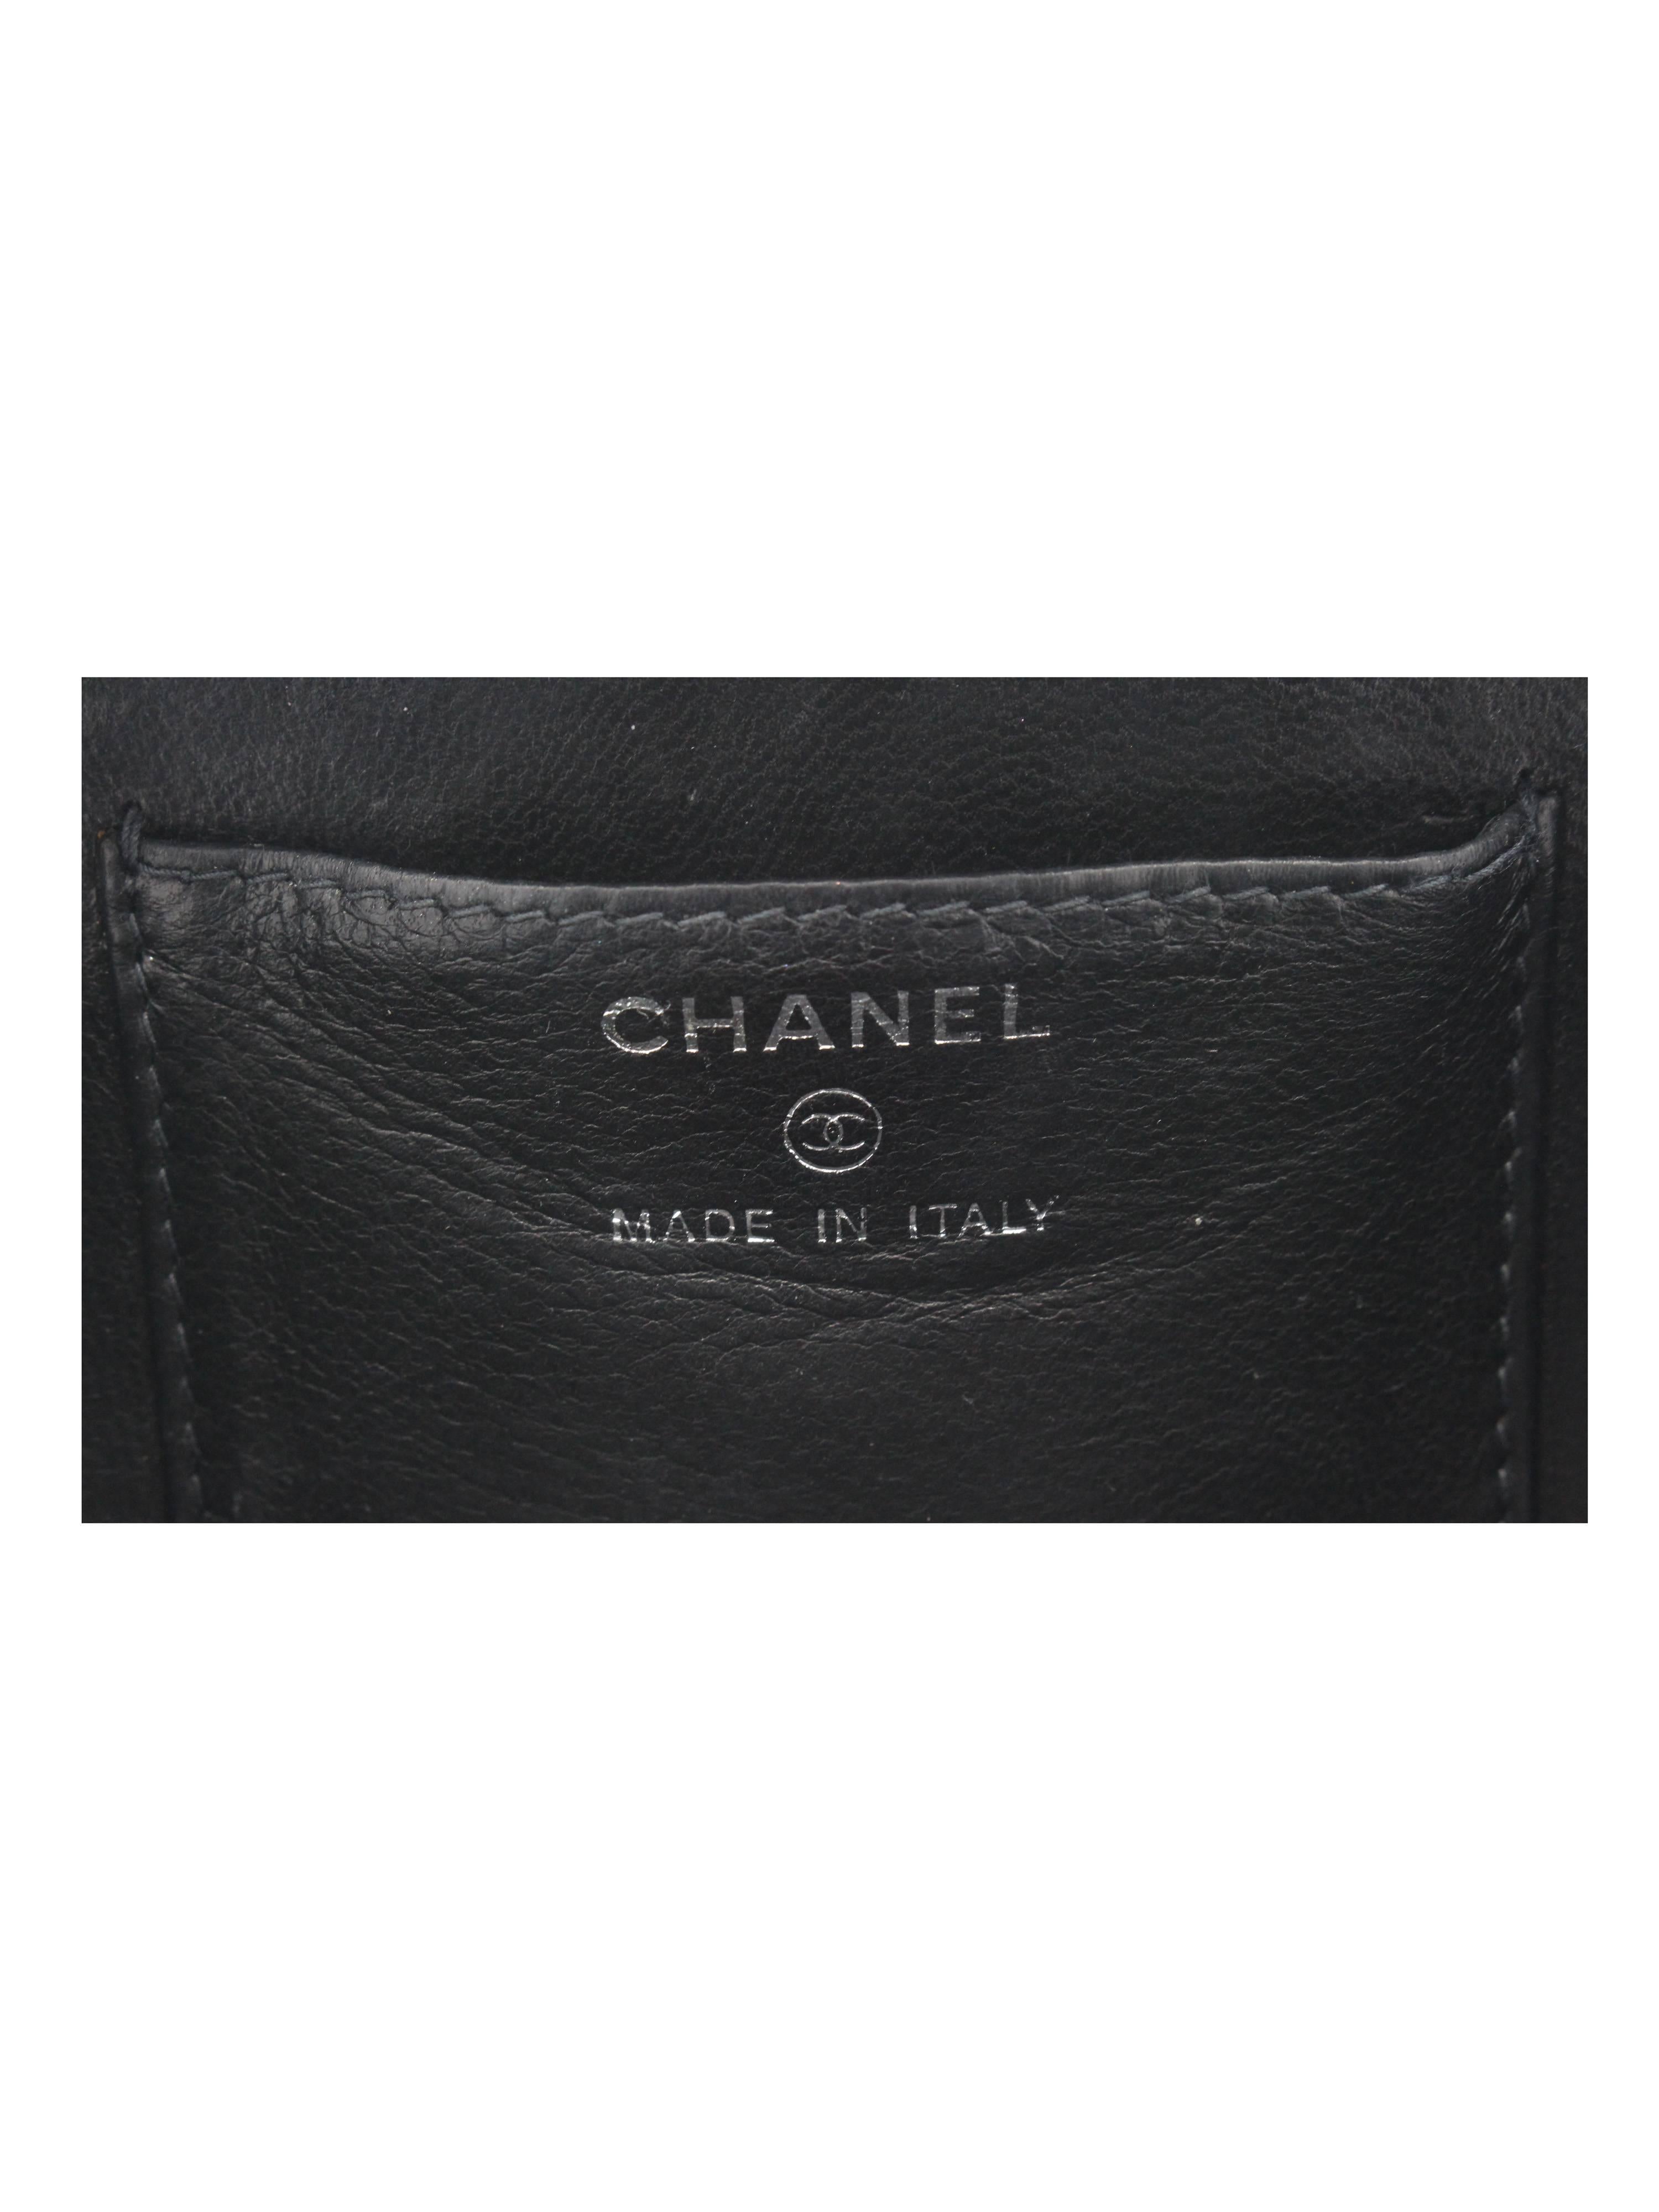 Chanel Black Perspex Lucite Minaudiere Clutch / Chain Wristlet Collectors For Sale 1